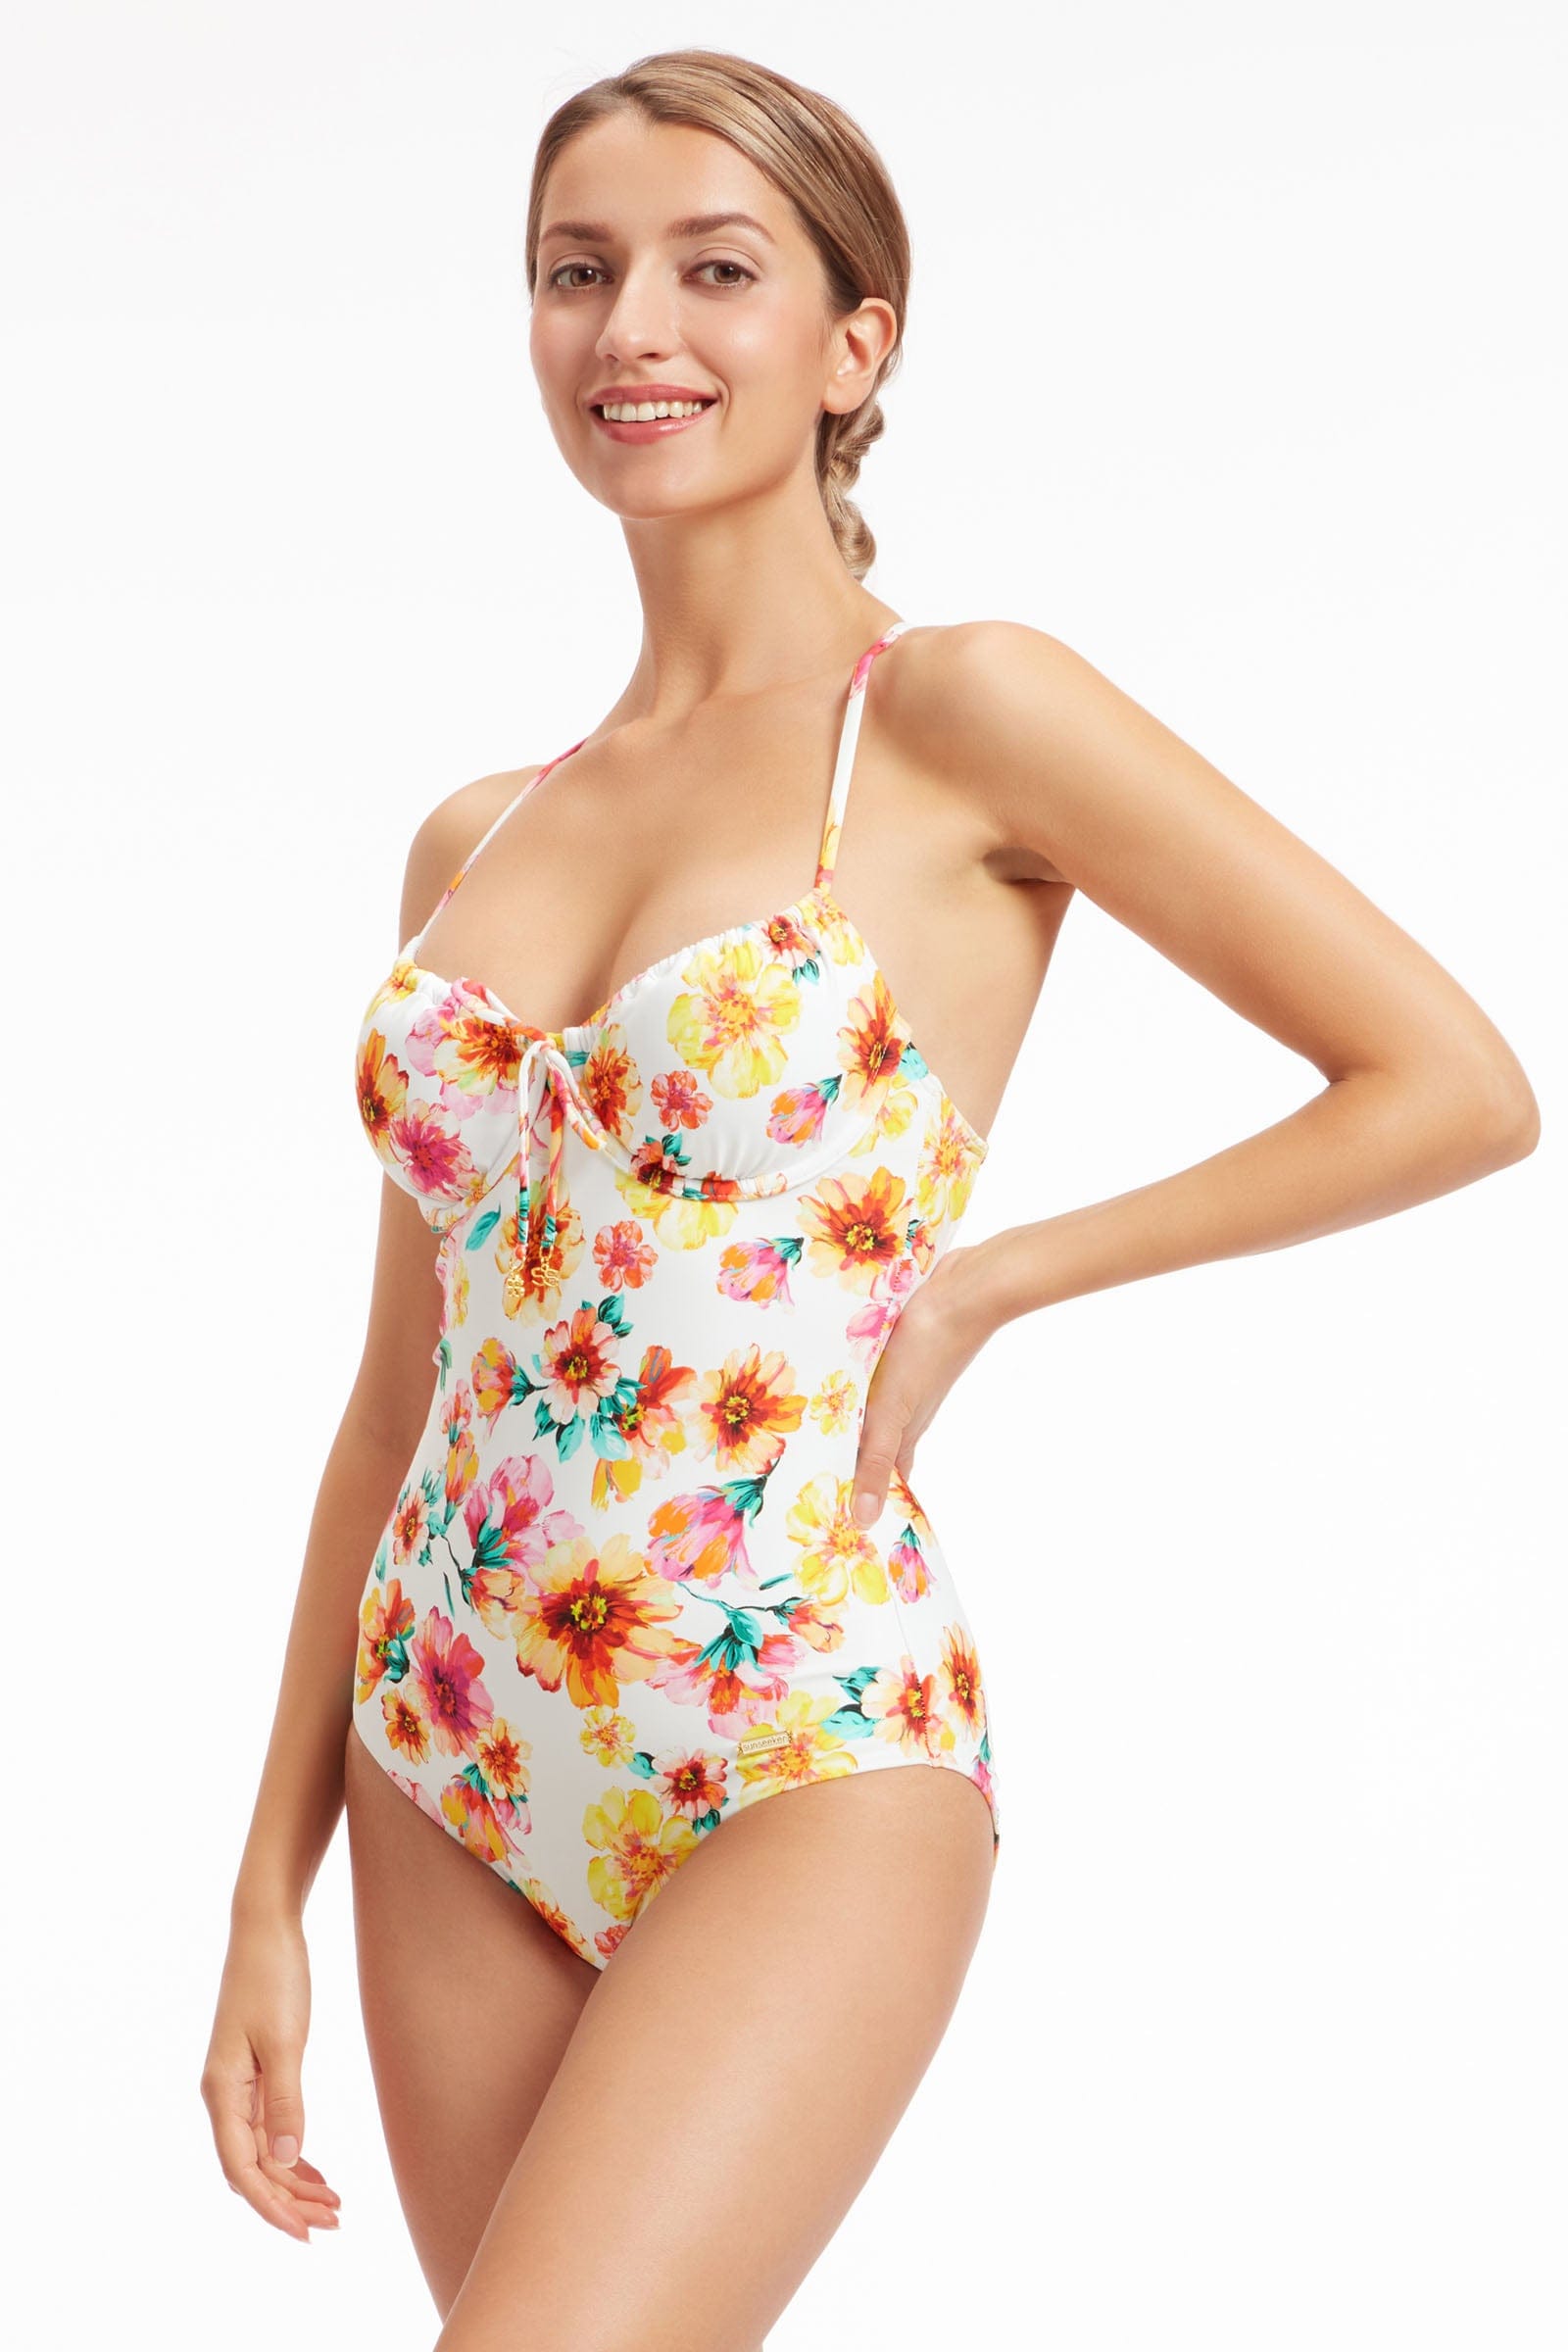 Swimsuits for All Women's Plus Size Ruched Underwire One Piece Swimsuit -  10, Bold Floral